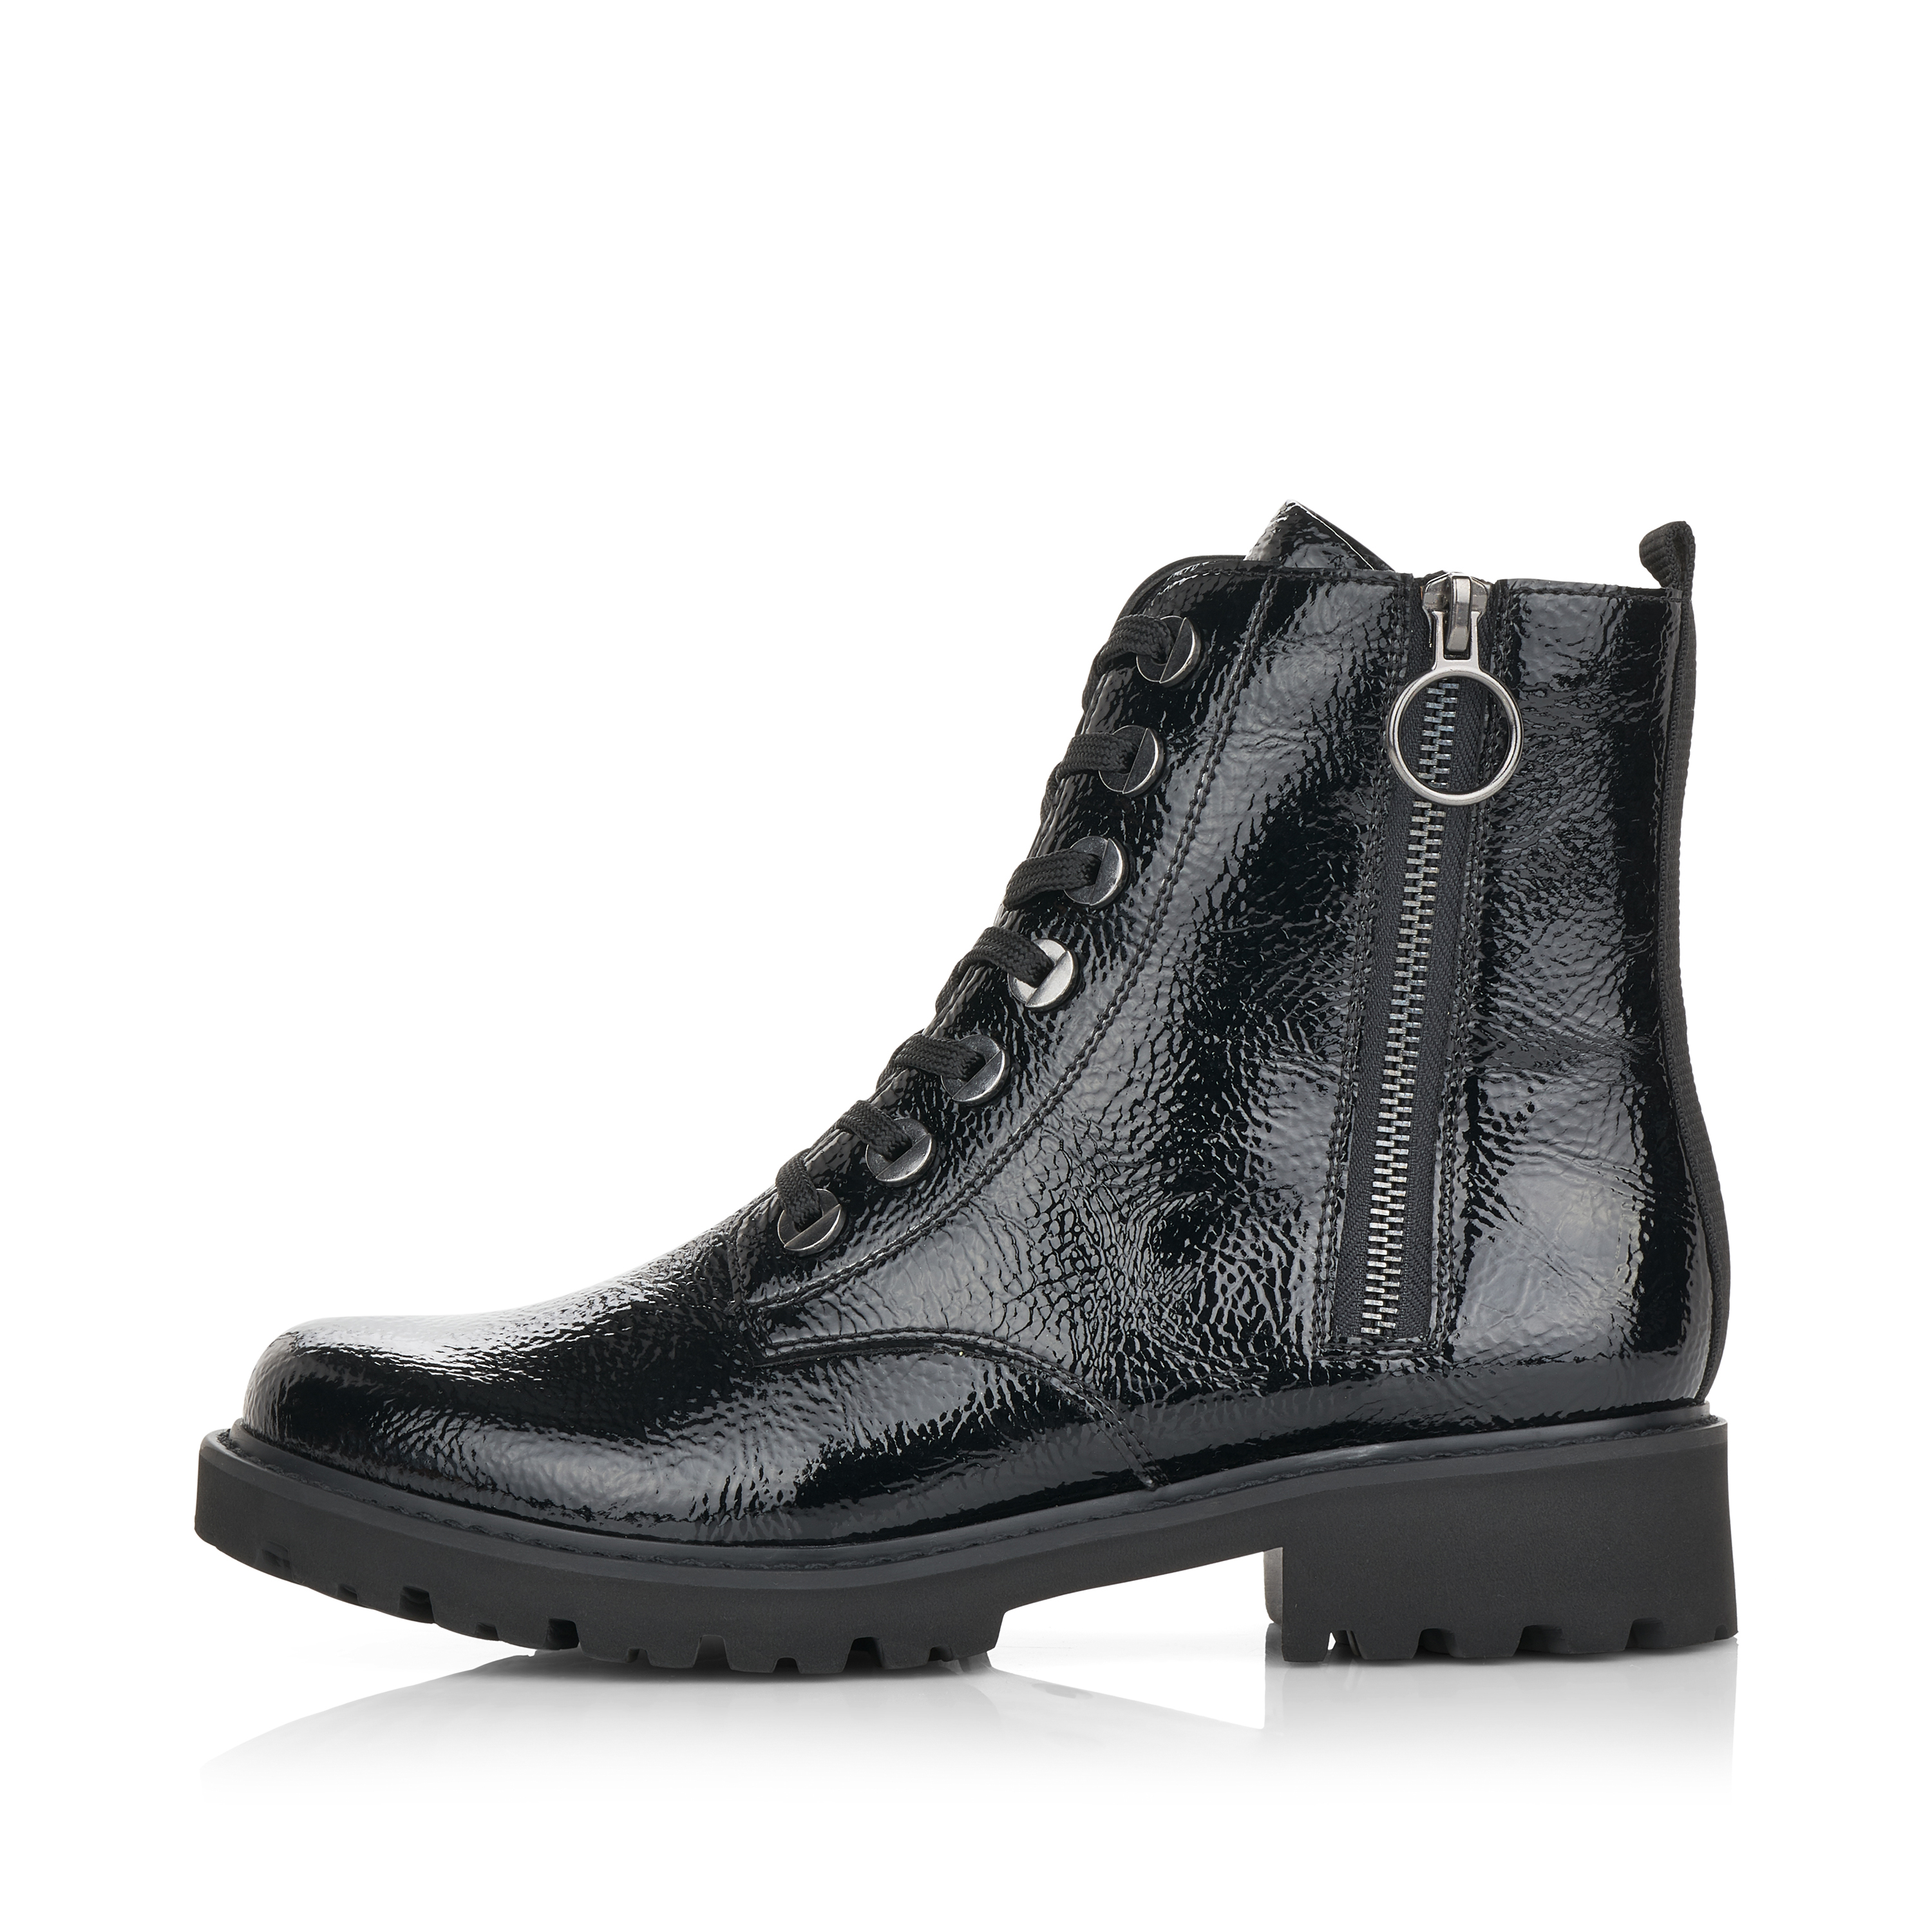 Black remonte women´s biker boots D8671-02 with cushioning and especially light sole. The outside of the shoe